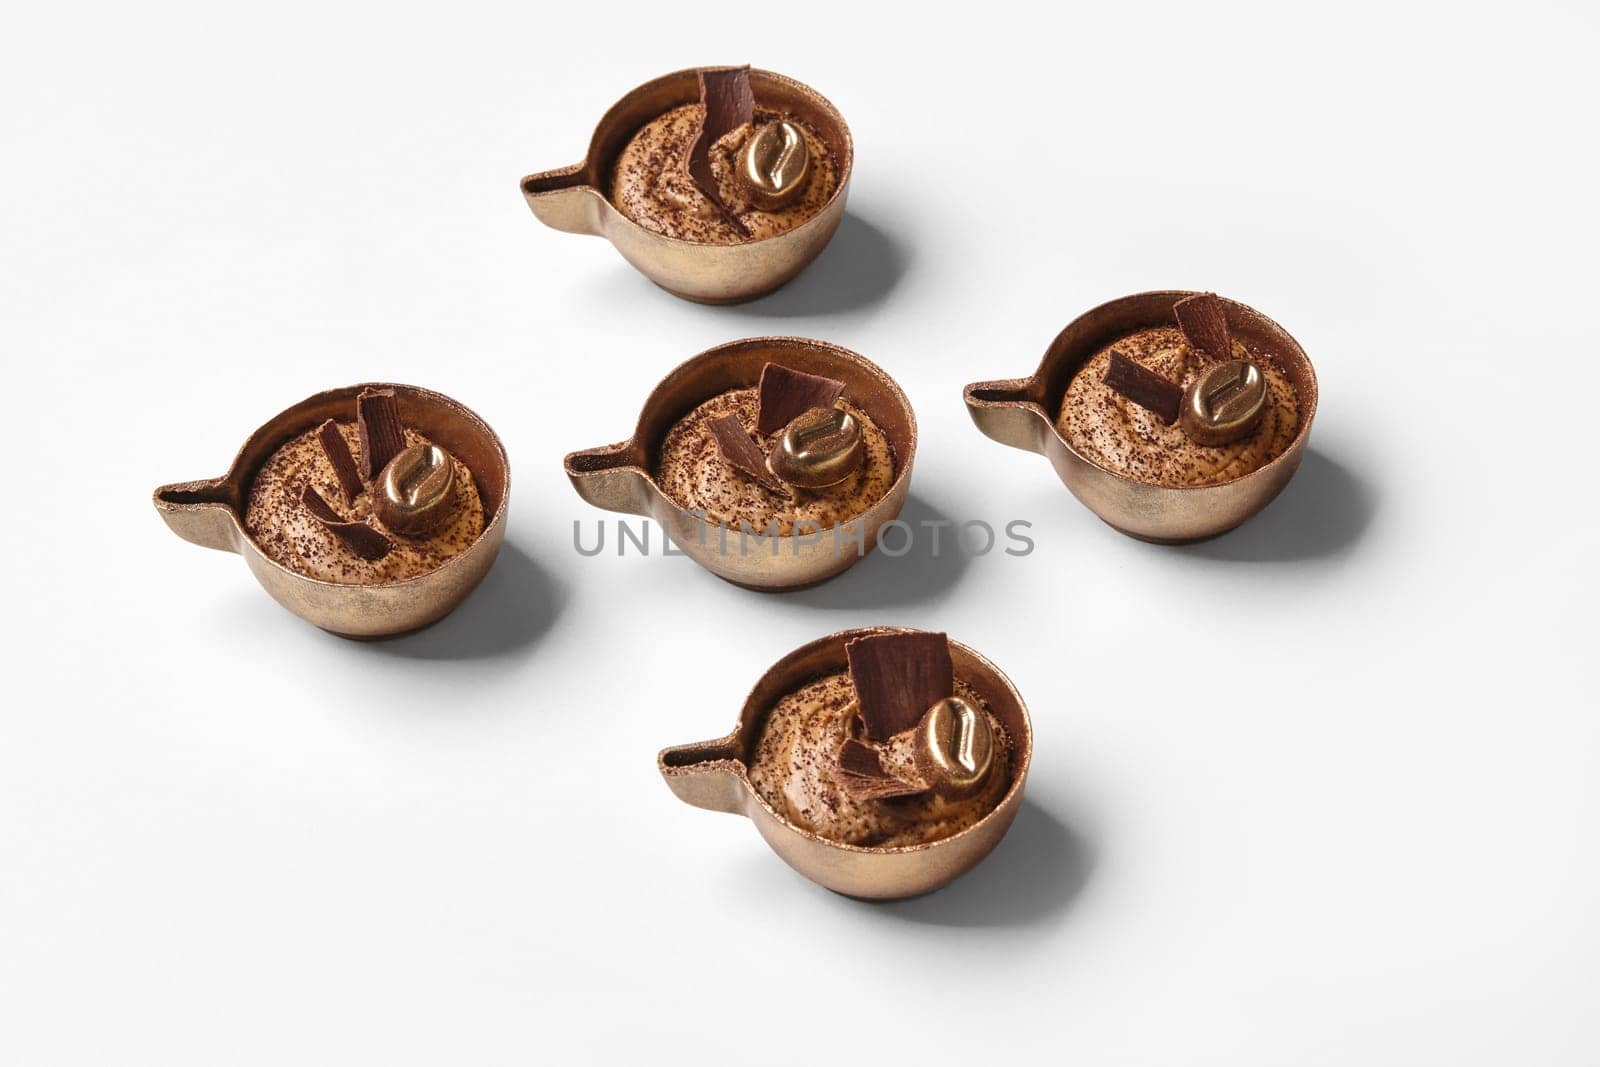 Handmade chocolate sweets with rich coffee cream, artistically designed to look like small coffee cups, against white backdrop